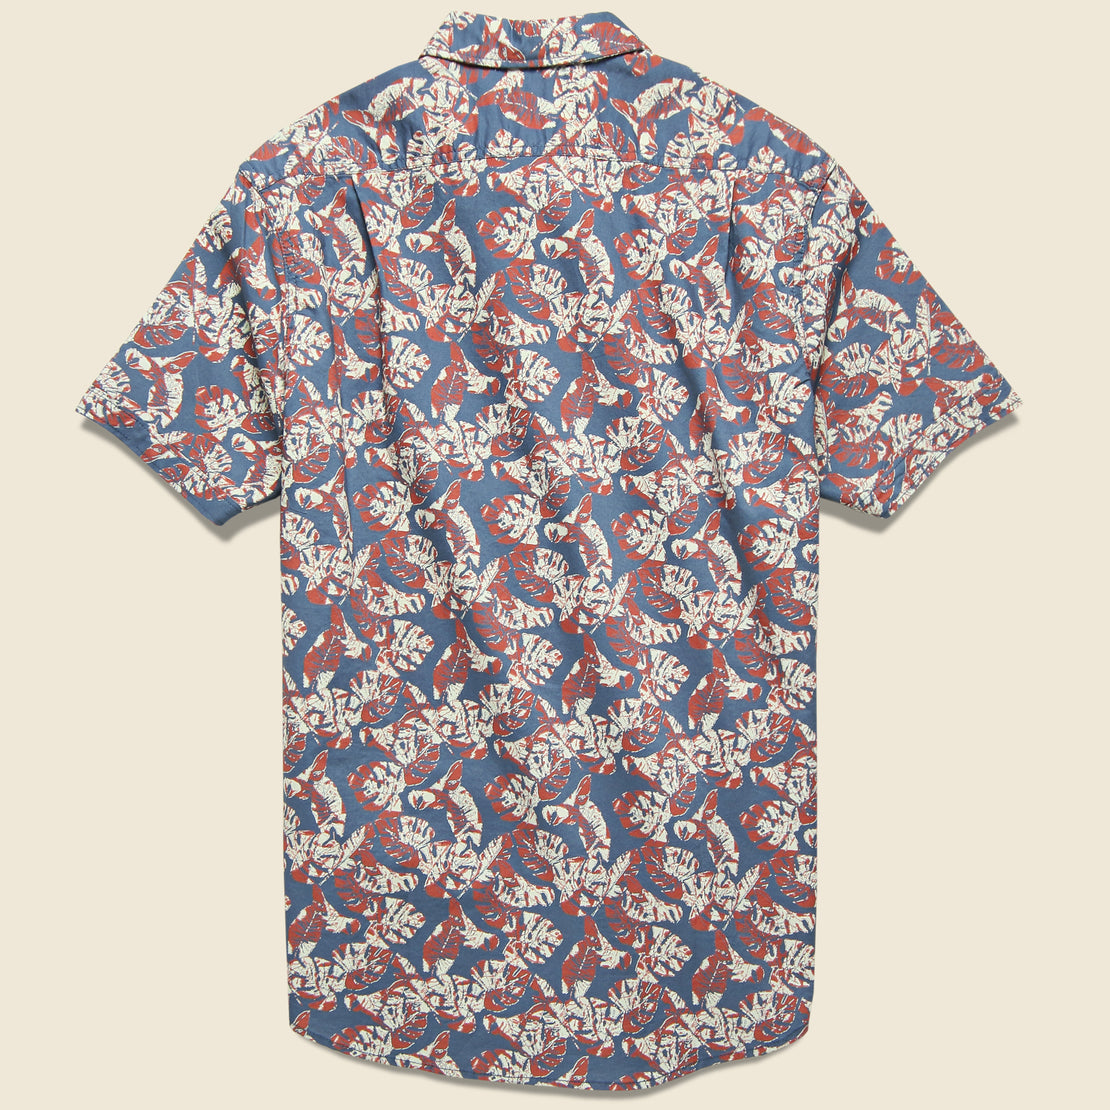 Floral Printed Gauze Shirt - Faded Navy/Red/Cream